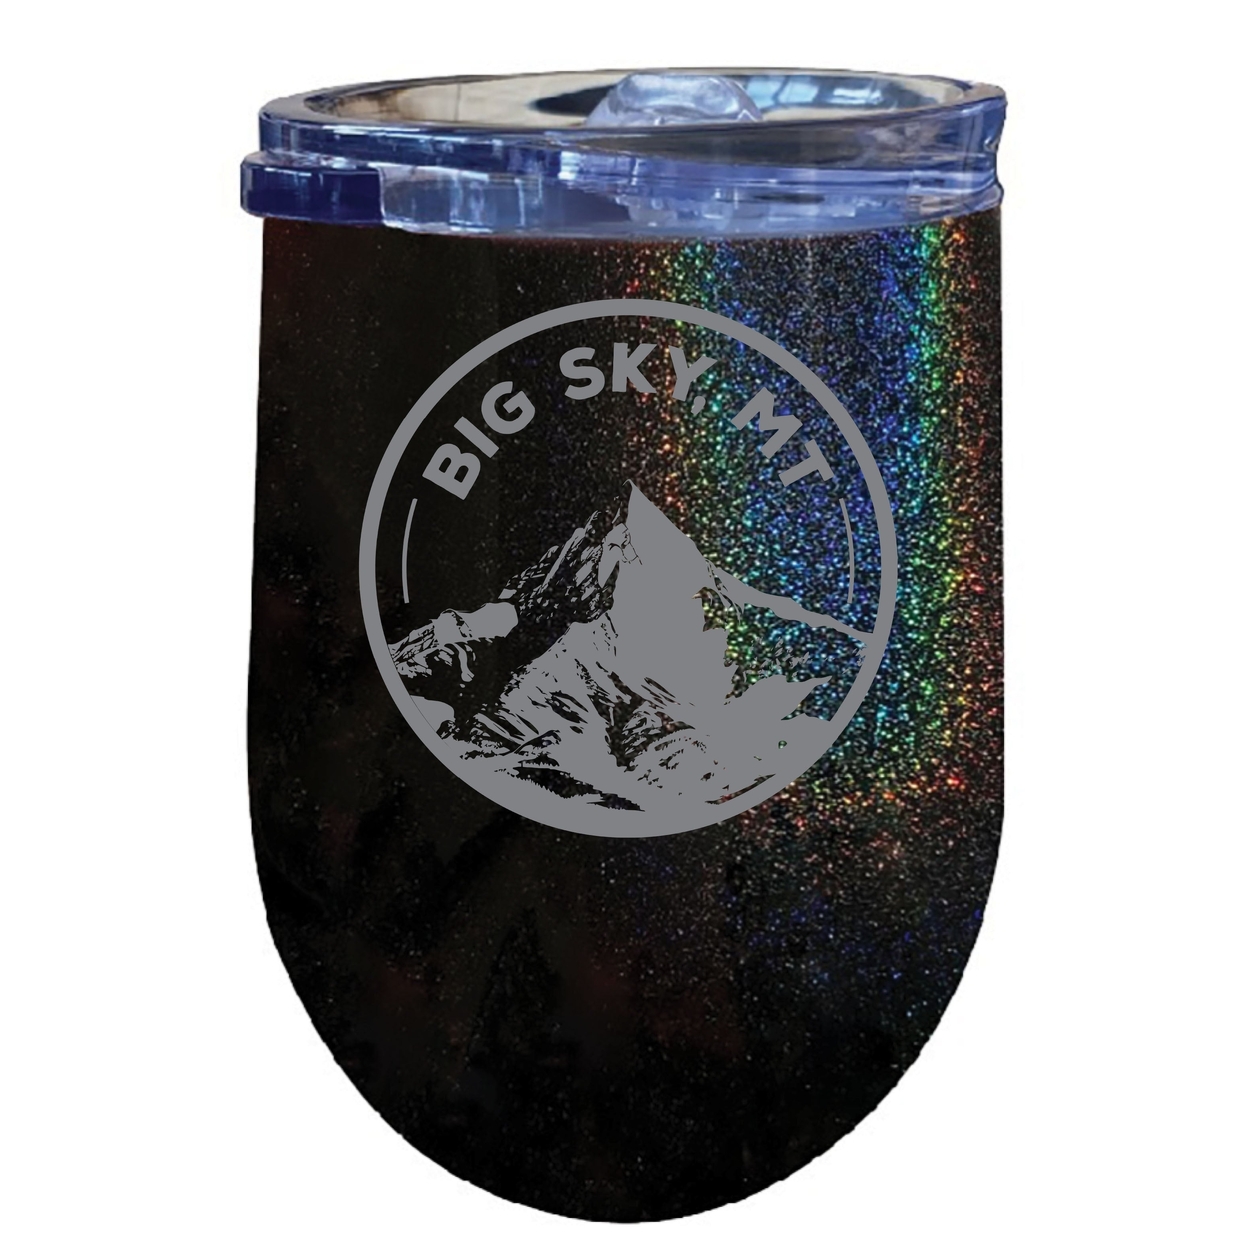 Big Sky Montana Souvenir 12 Oz Engraved Insulated Wine Stainless Steel Tumbler - Seafoam,,2-Pack